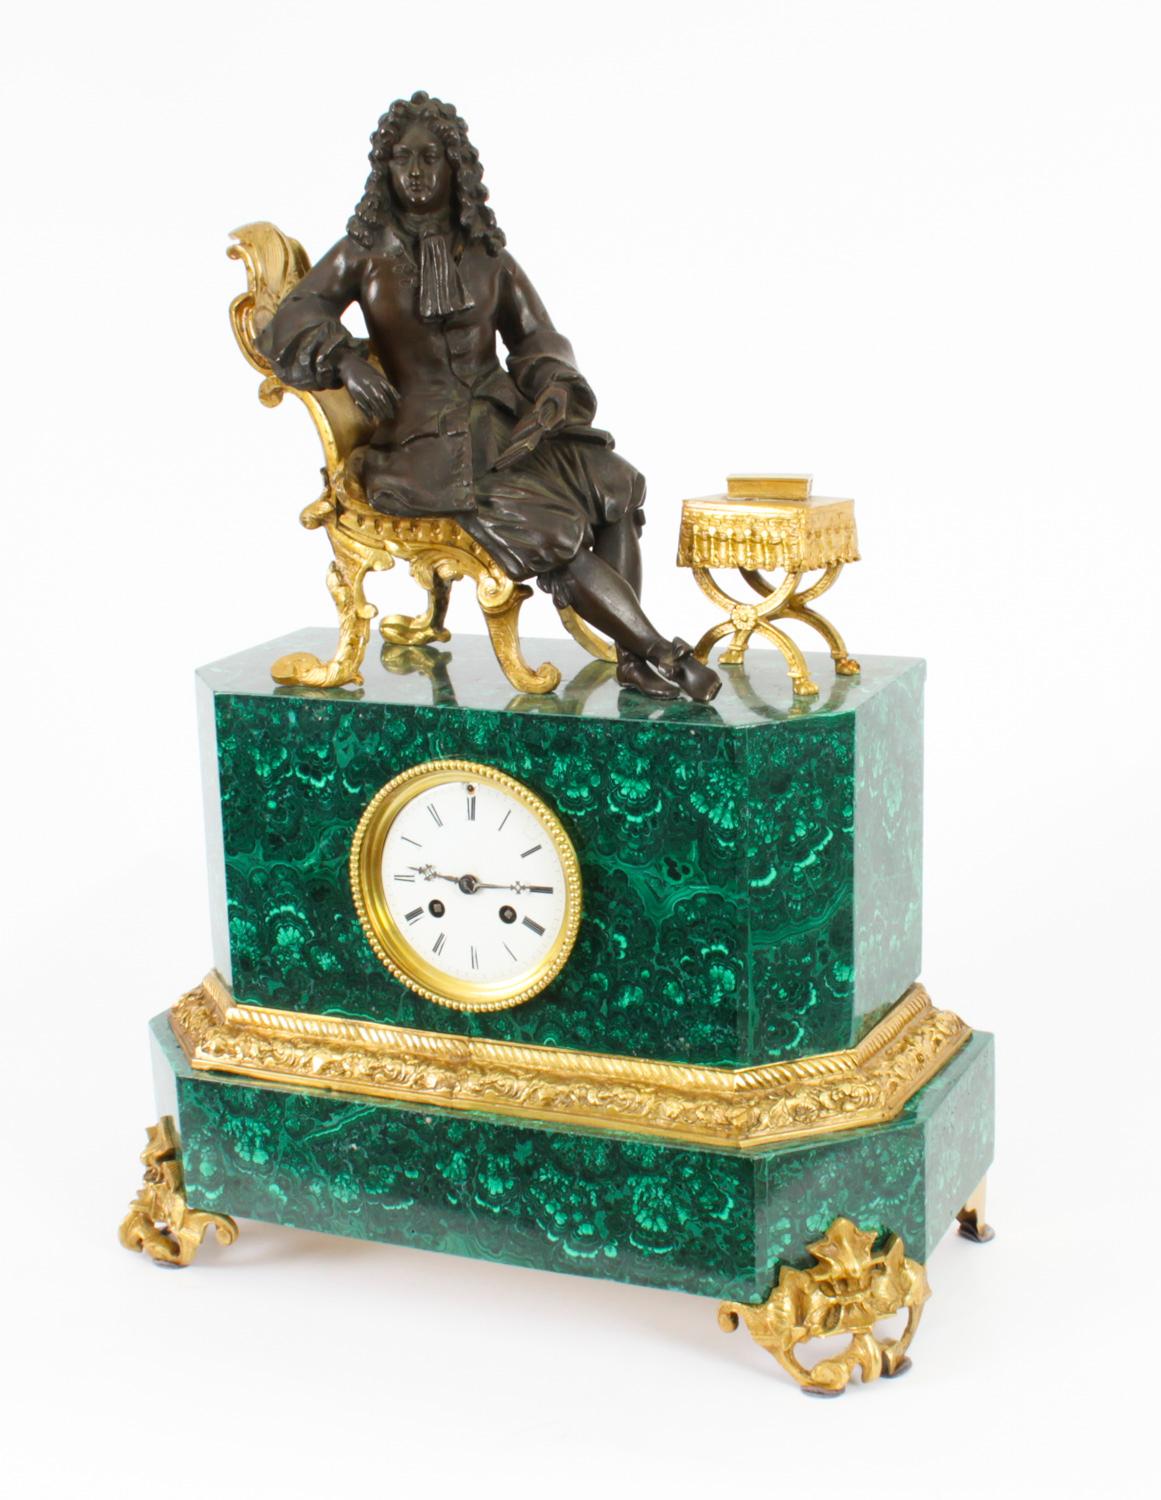 This is a superb quality antique French malachite, bronze and ormolu mantel clock dating from Circa 1850 in date.

It features Louis XVI seated on an ormolu throne chair whilst reading a book.

The clockmakers name is inscribed on the backplate.